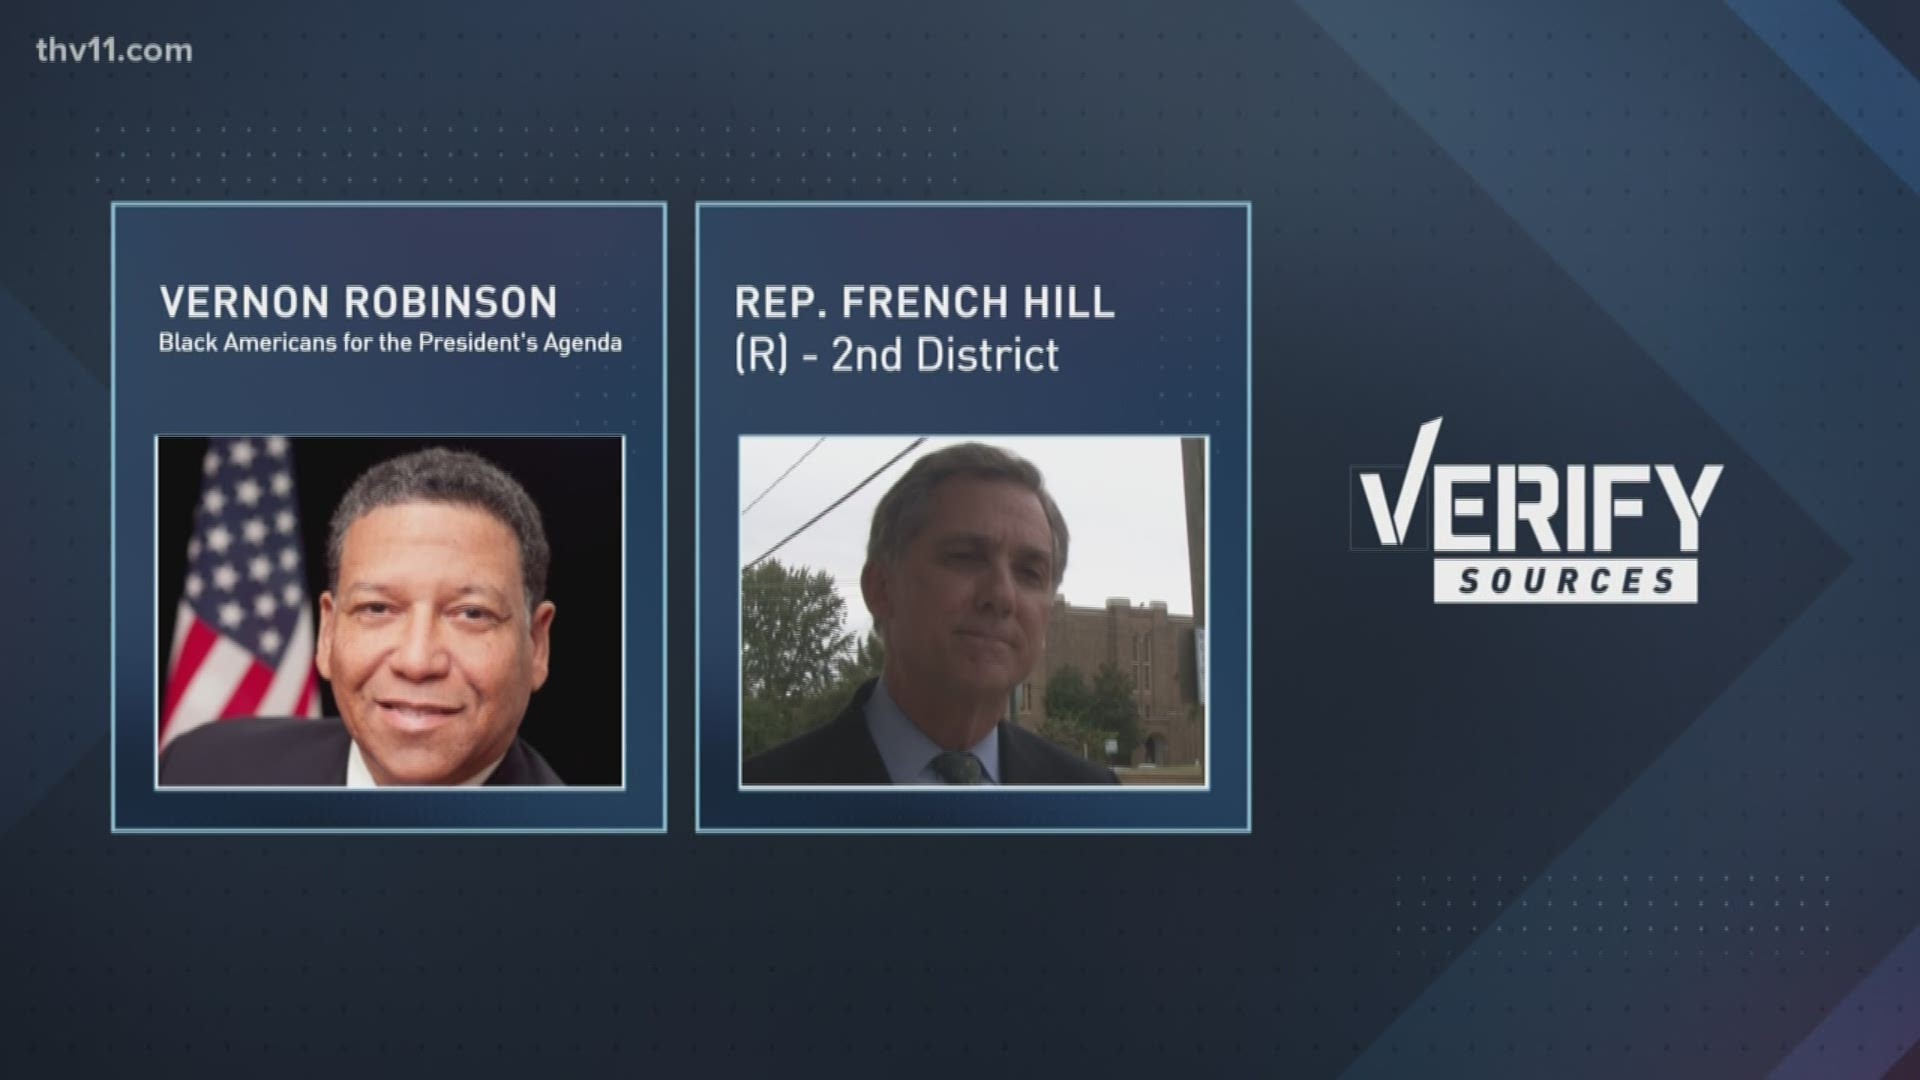 The ad is aimed at African Americans and is being denounced by Representative French Hill as racist.